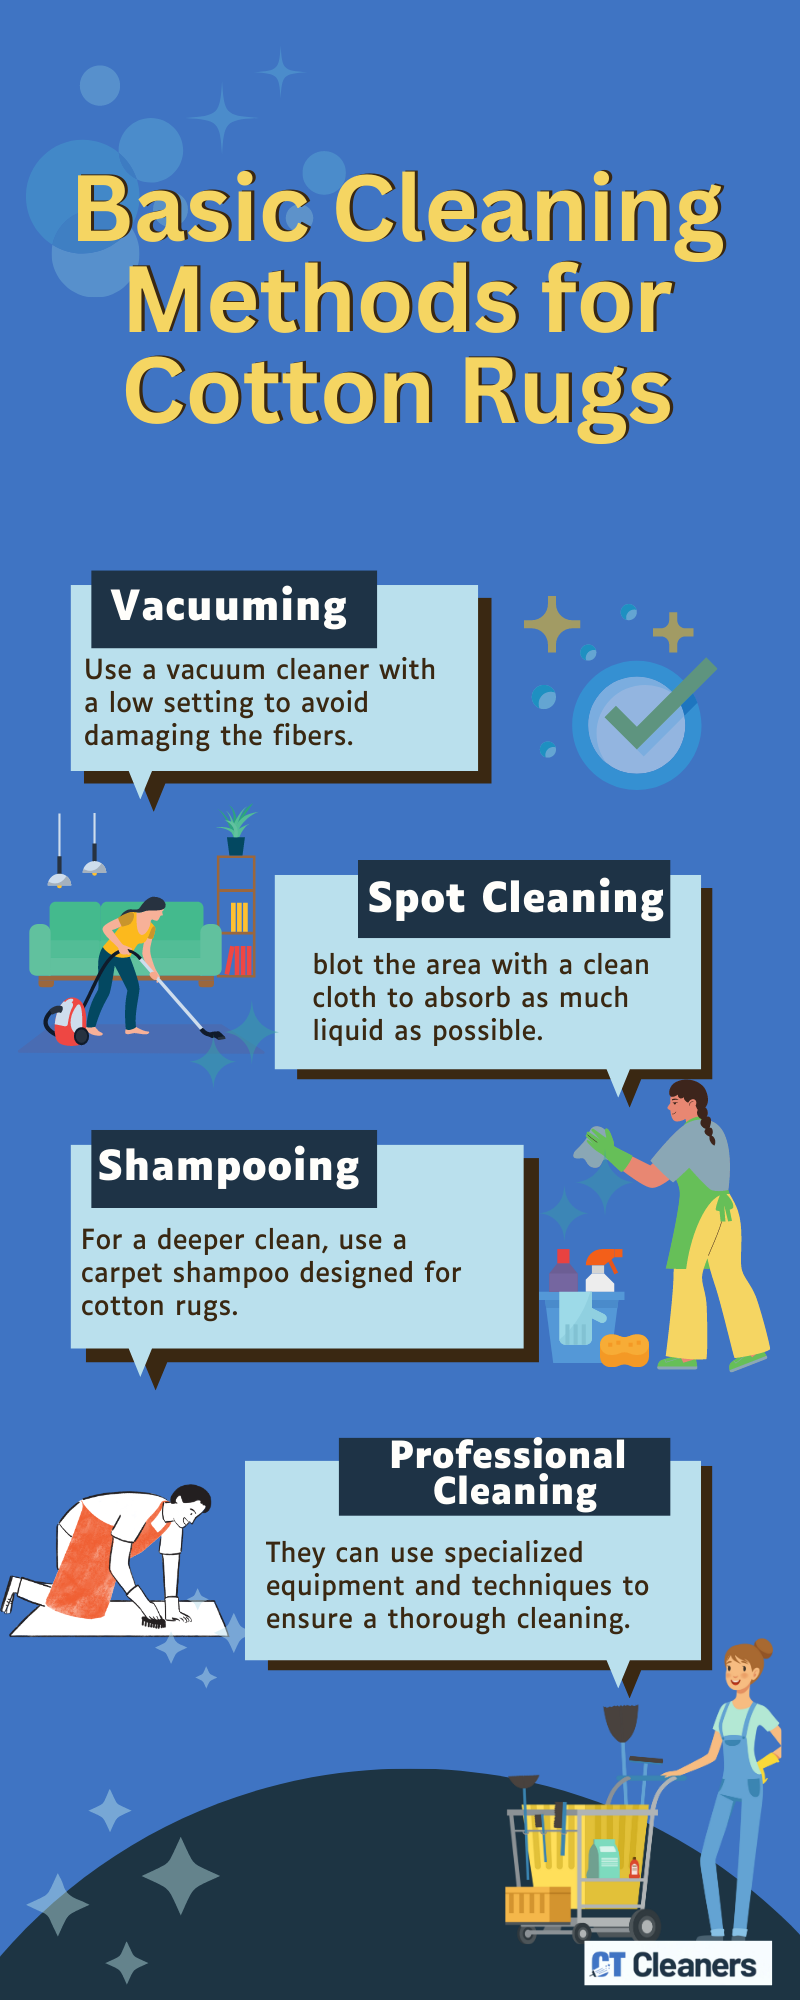 Basic Cleaning Methods for Cotton Rugs